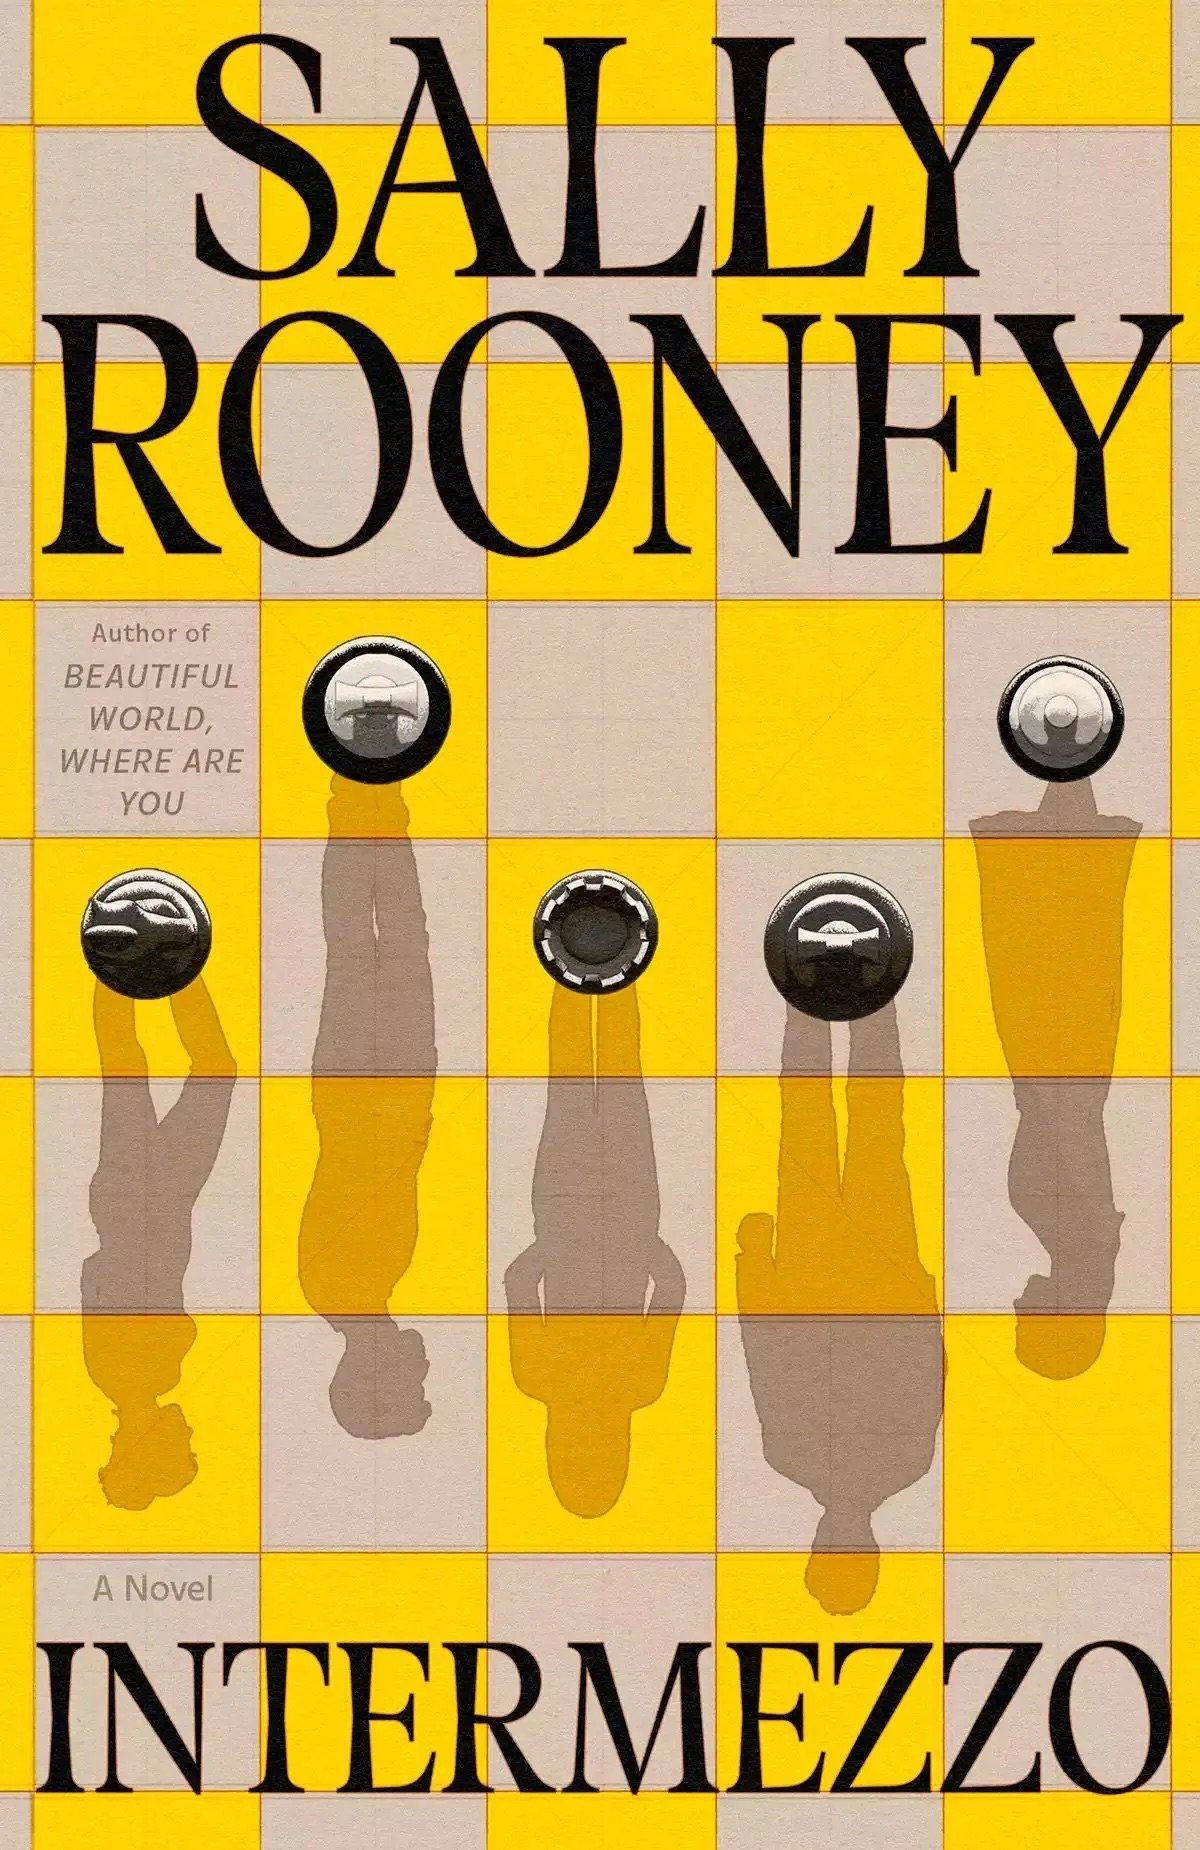 the cover of Sally Rooney's Intermezzo, featuring a yellow and brown chessboard and chess pieces whose shadows are people